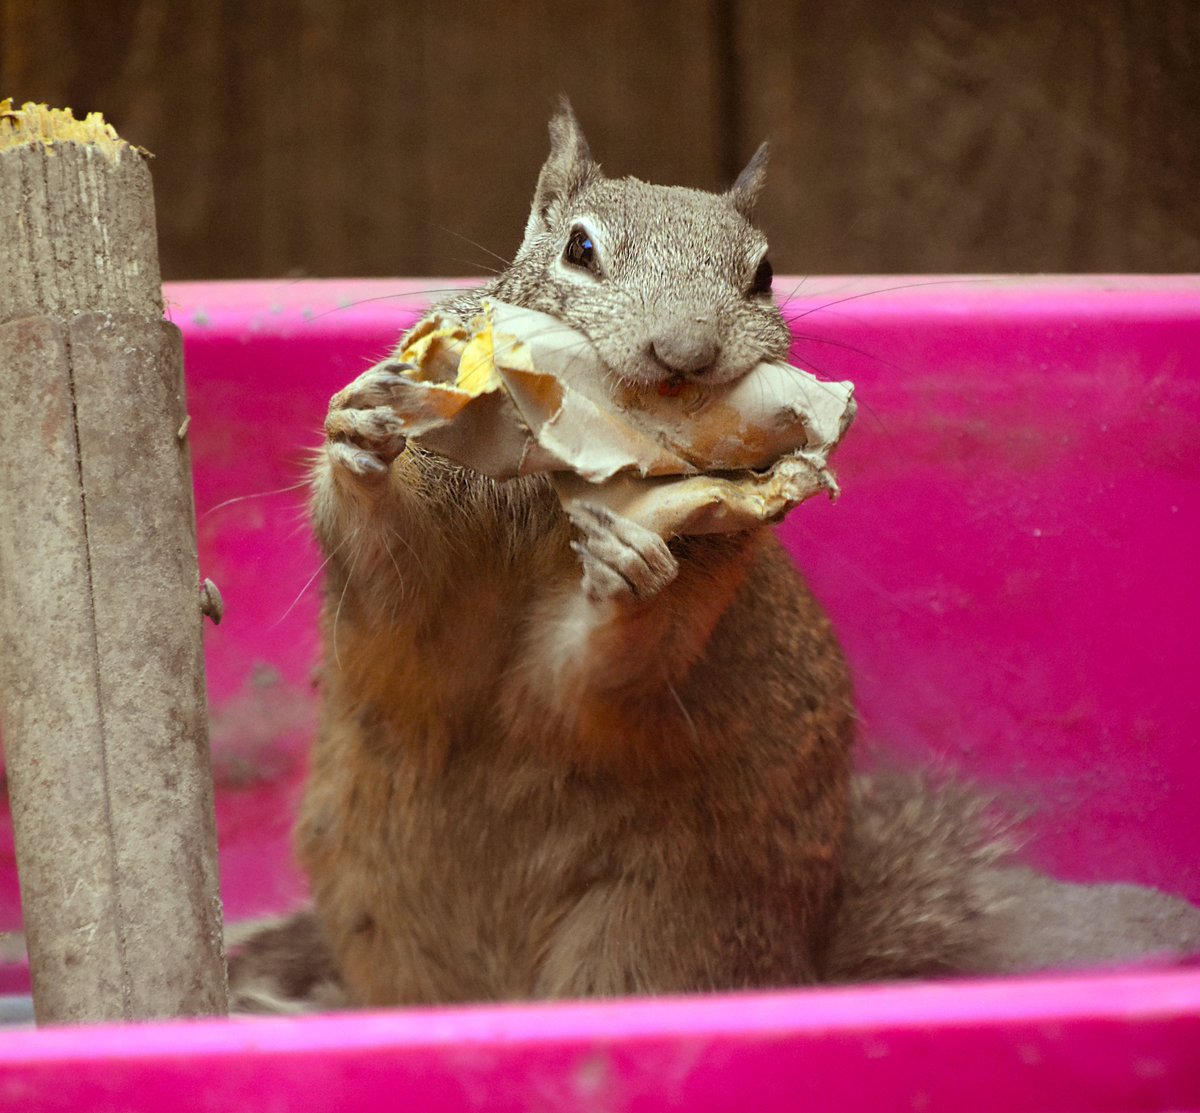 Today’s Daily Picture Theme is ‘Prize' A guy working here stopped after breaking a shovel, he put the shovel and cement bag in a pink bin on my front porch. A ground squirrel noticed + started taking mouthfuls of paper for her nest. California Ground Squirrel My front yard, CA